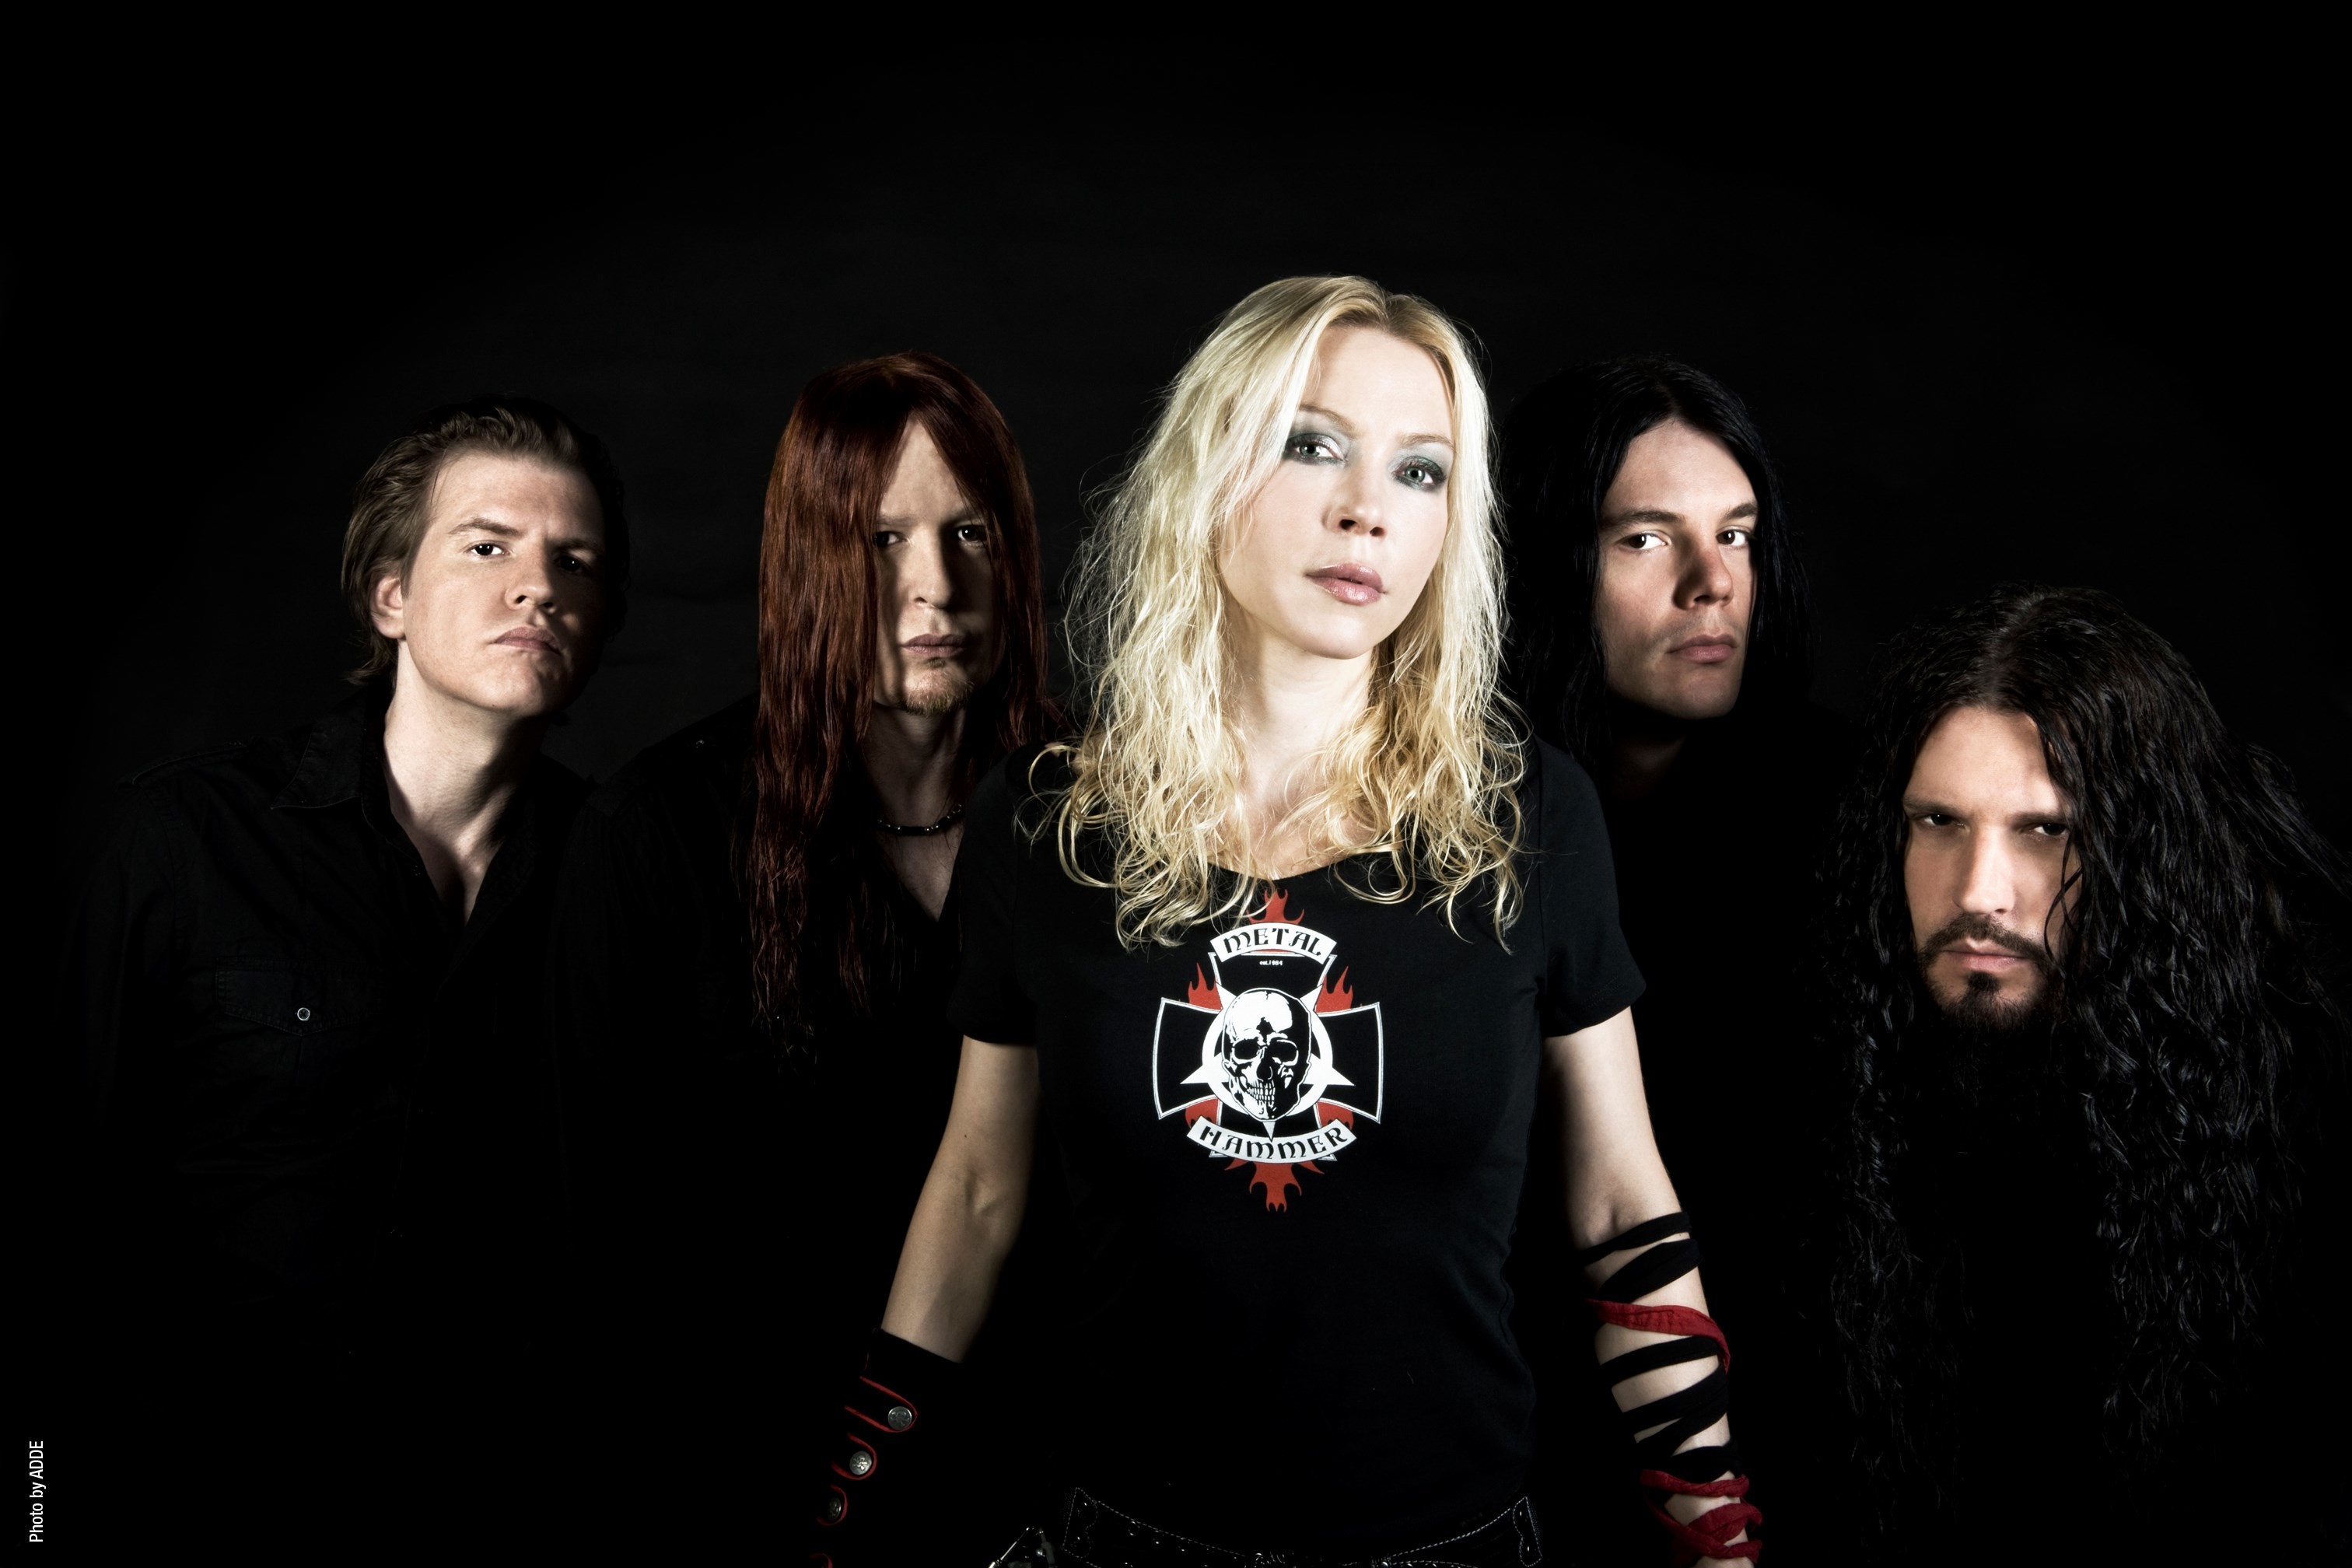 3024x2016  px arch enemy picture - Full HD Wallpapers, Photos by Moore Birds